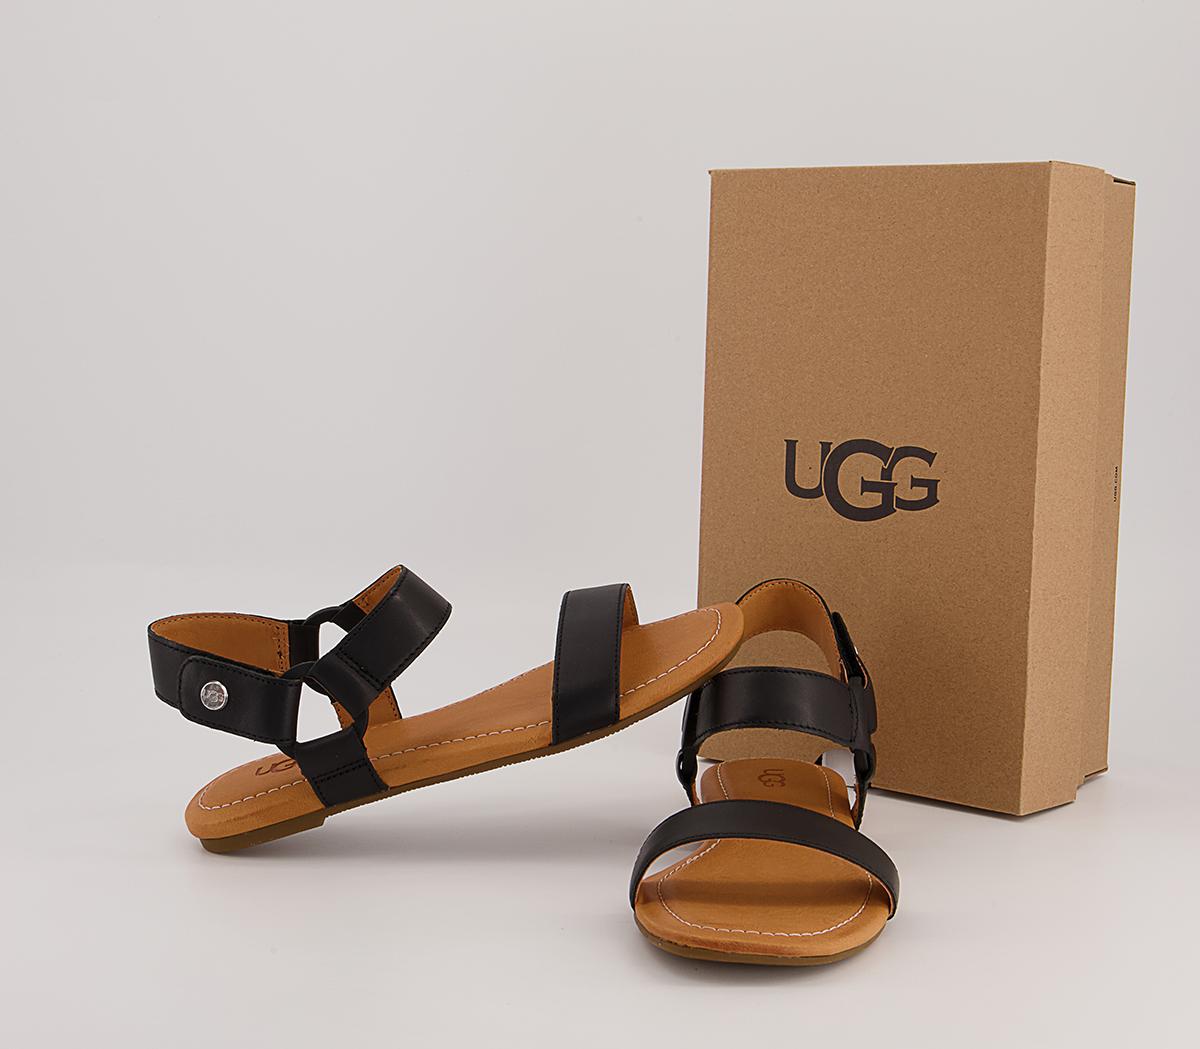 UGG Rynell Sandals Black Leather - Women’s Sandals